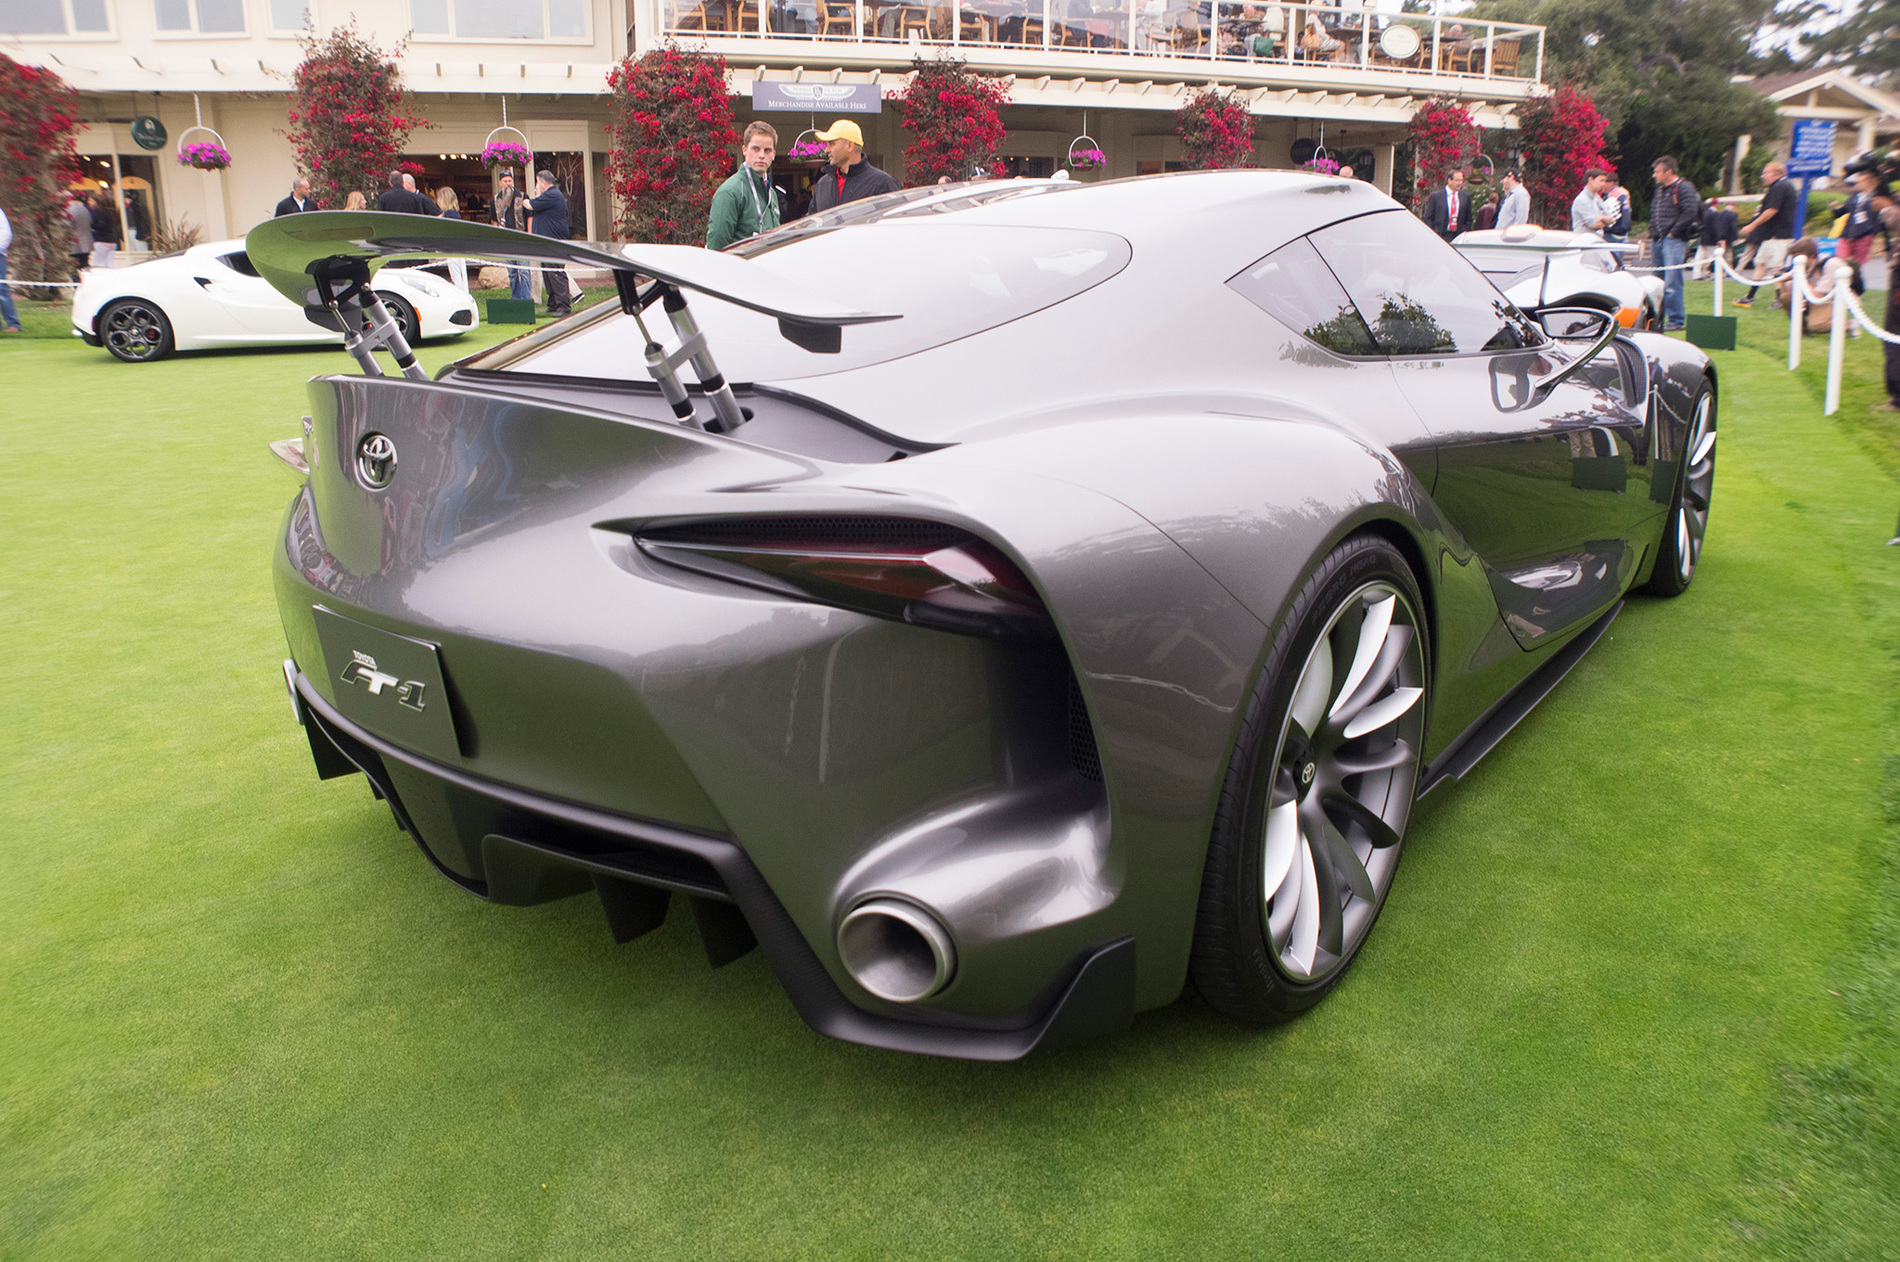 Toyota-FT-1-concept-in-graphite-rear-side-view.jpg